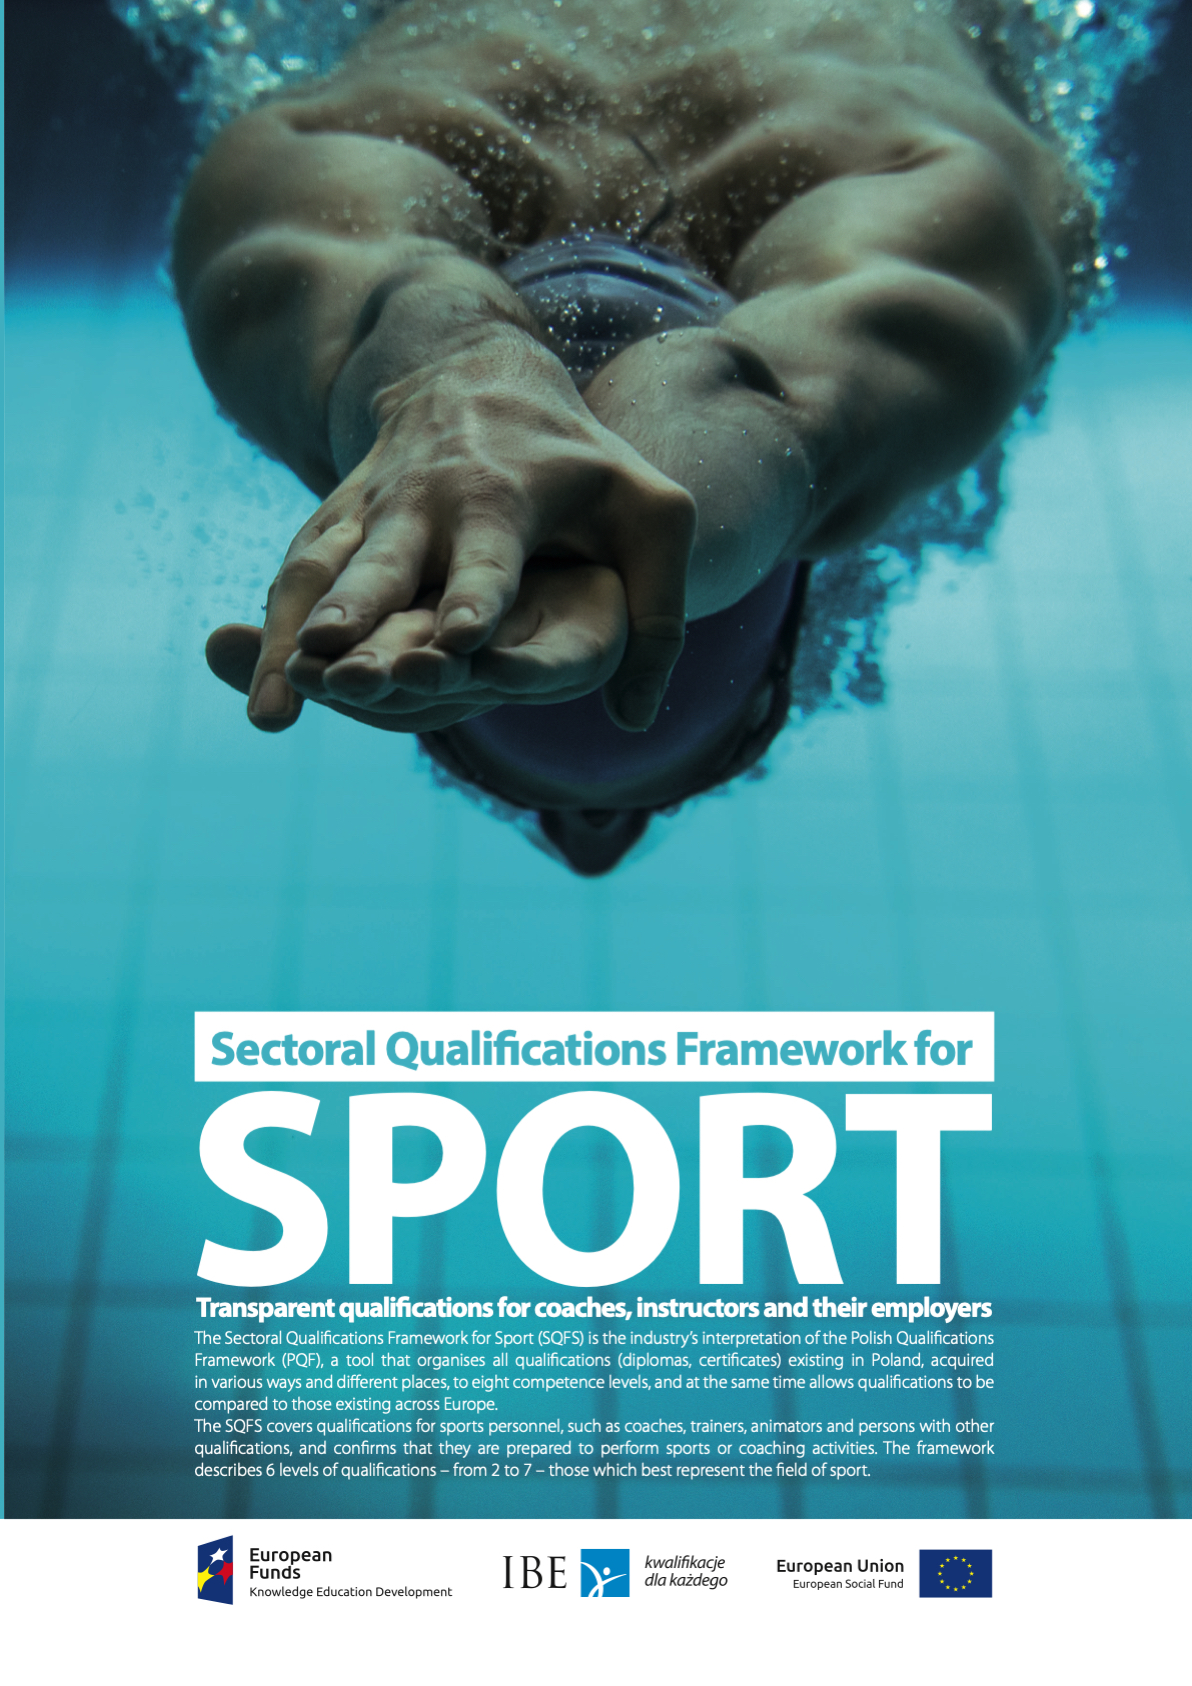 The Sectoral Qualifications Framework for Sport (SQFS)